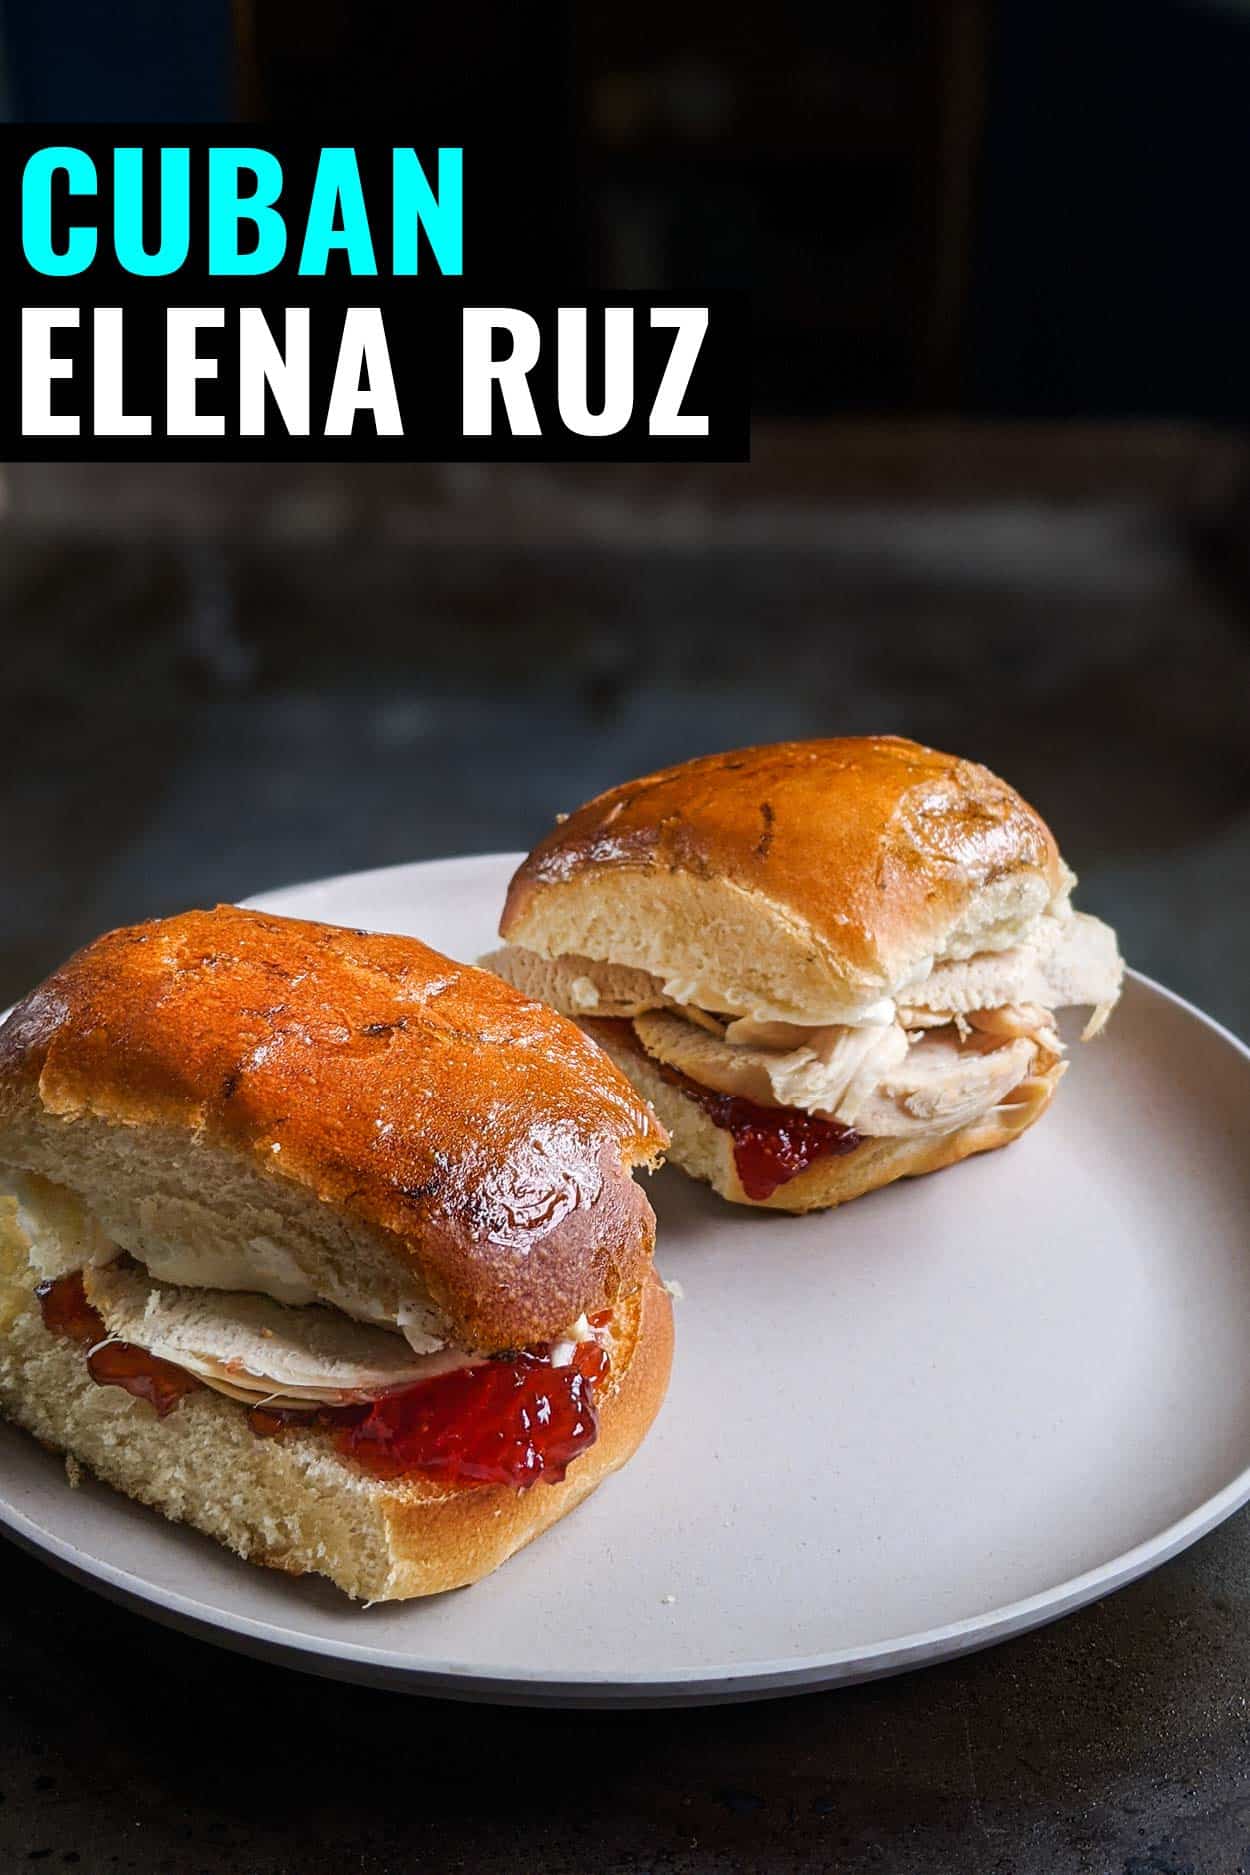 Open faced Elena Ruz sandwich, Cuban turkey sandwich with strawberry on one side and cream cheese on the other.